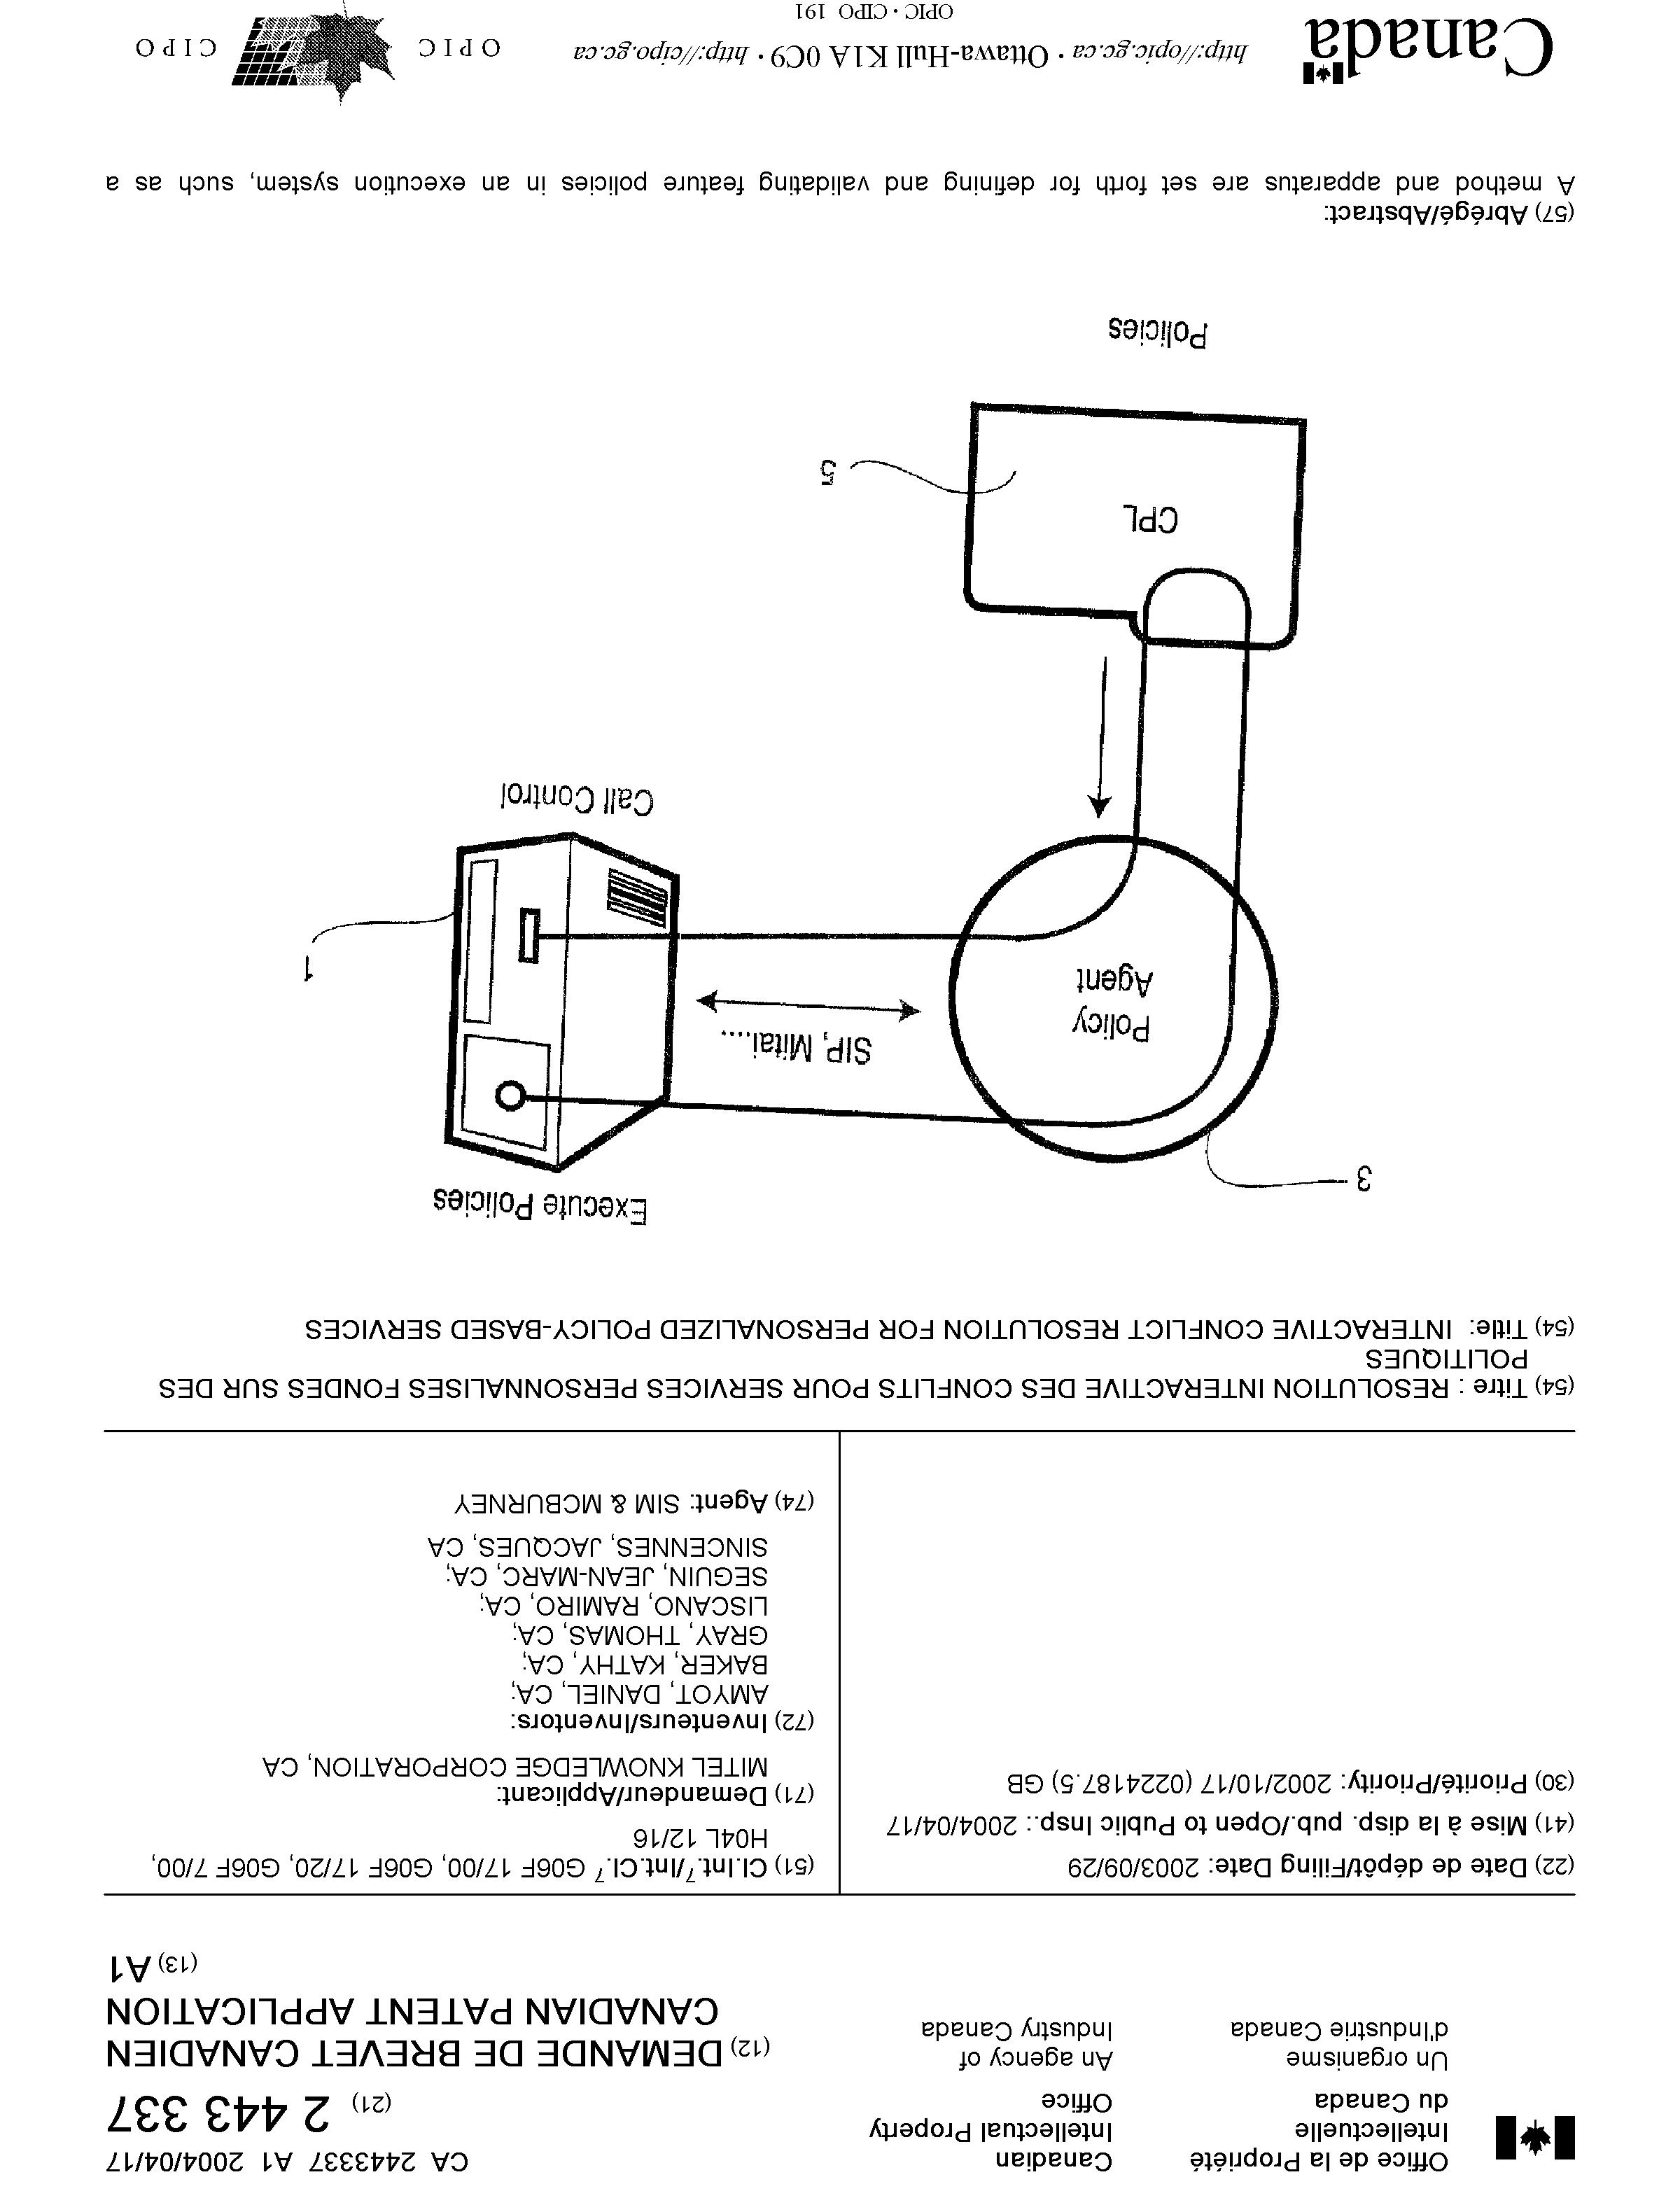 Canadian Patent Document 2443337. Cover Page 20031222. Image 1 of 2